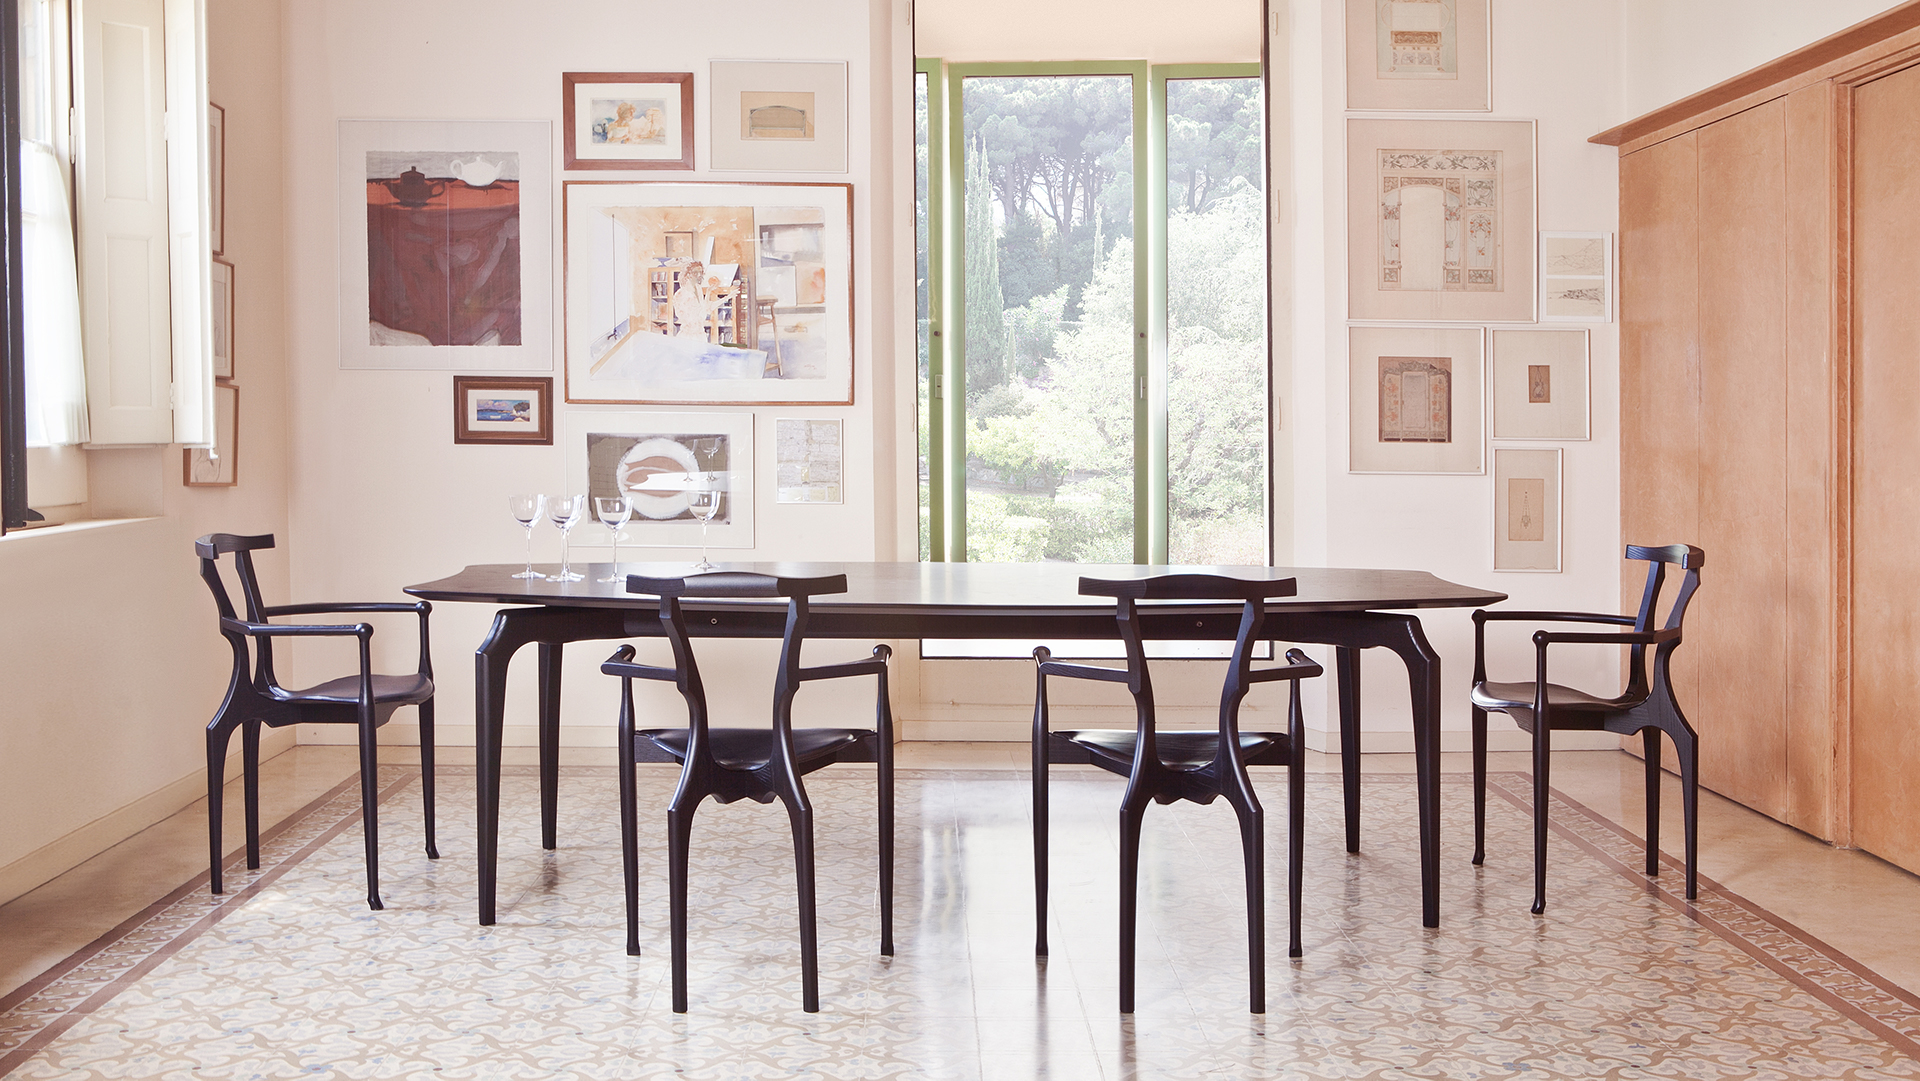 Gaulino Chairs & Table, Lifestyle